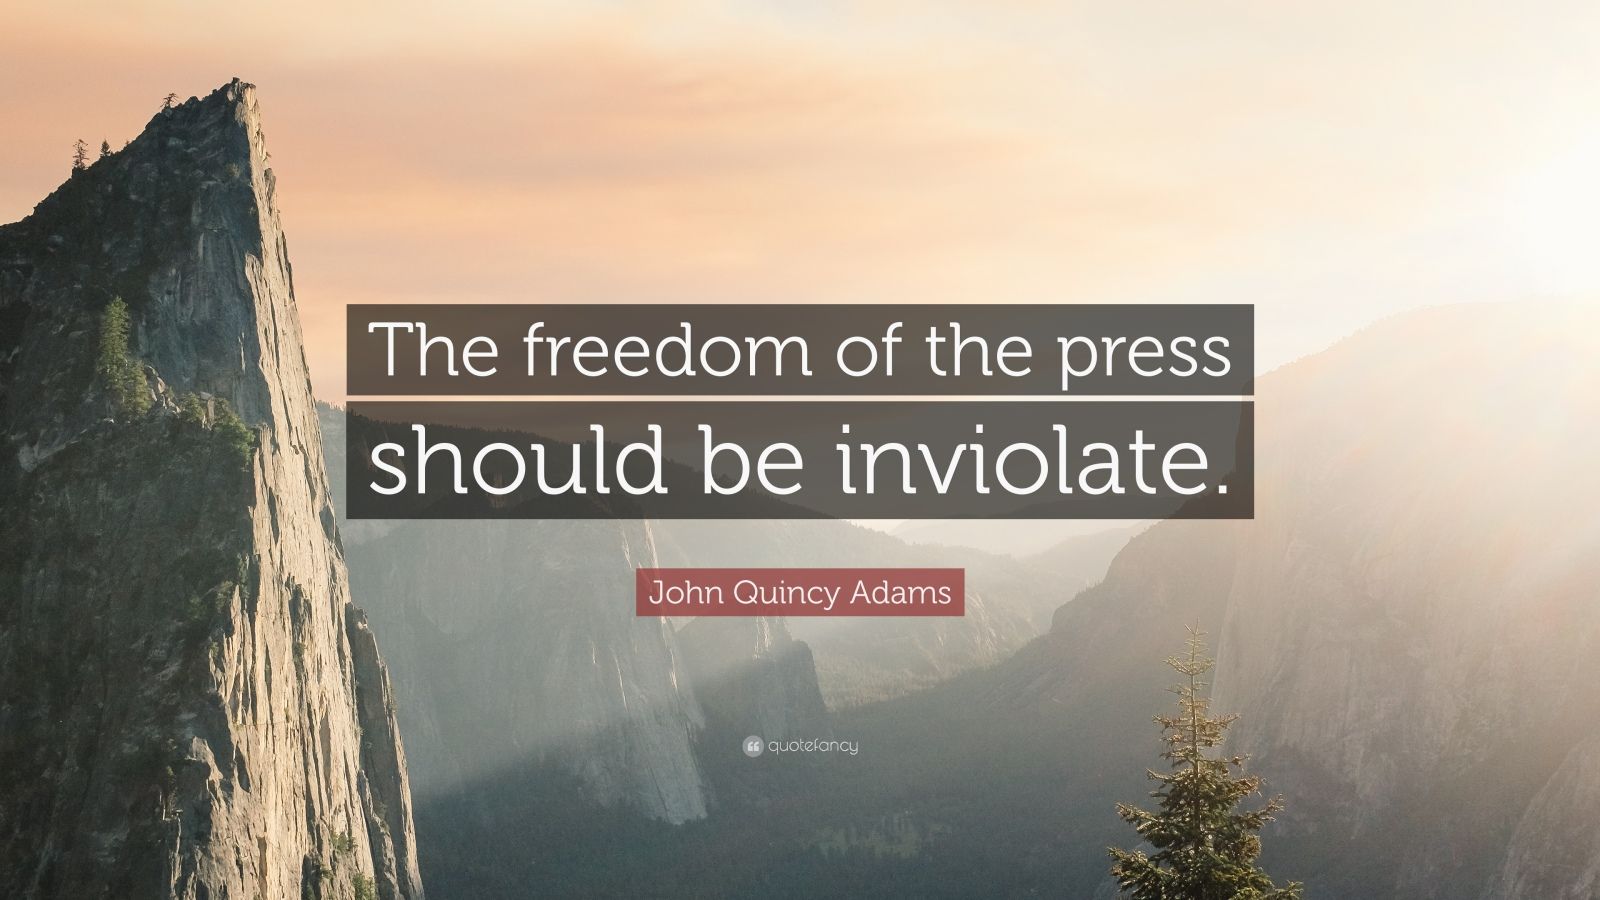 John Quincy Adams Quote: “The freedom of the press should be inviolate ...